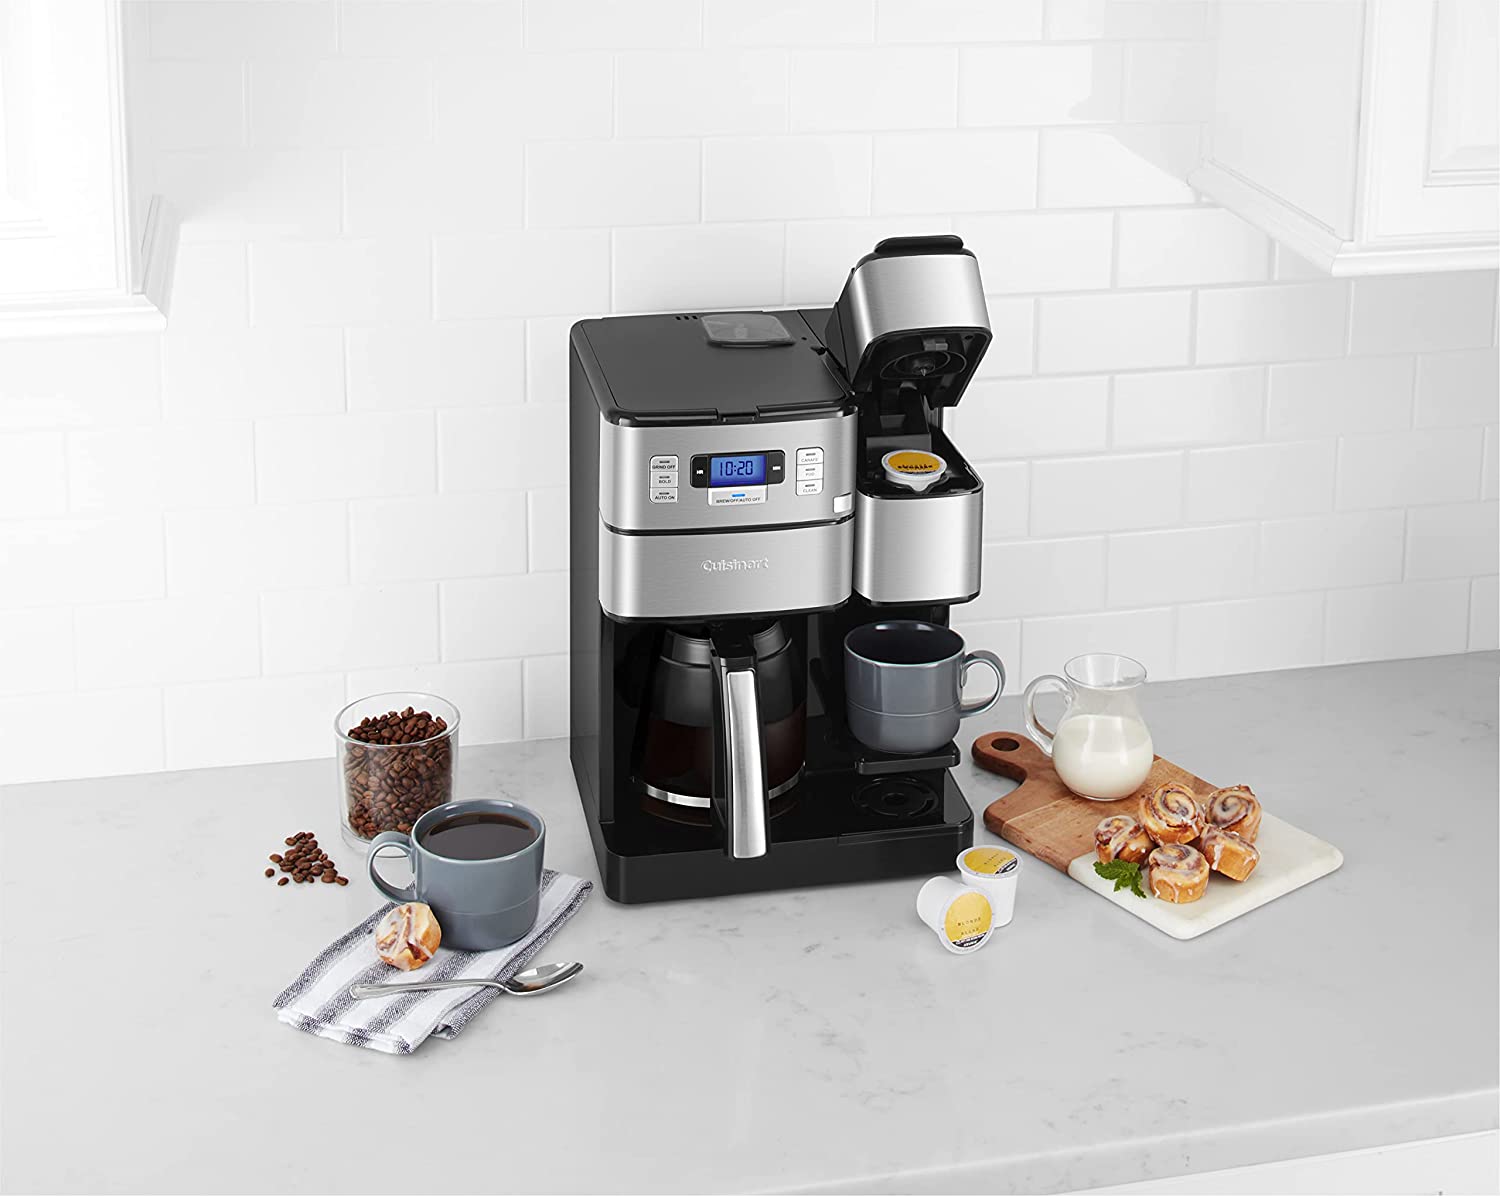 Cuisinart SS-GB1 Coffee Center Grind & Brew Plus, Built-in Coffee